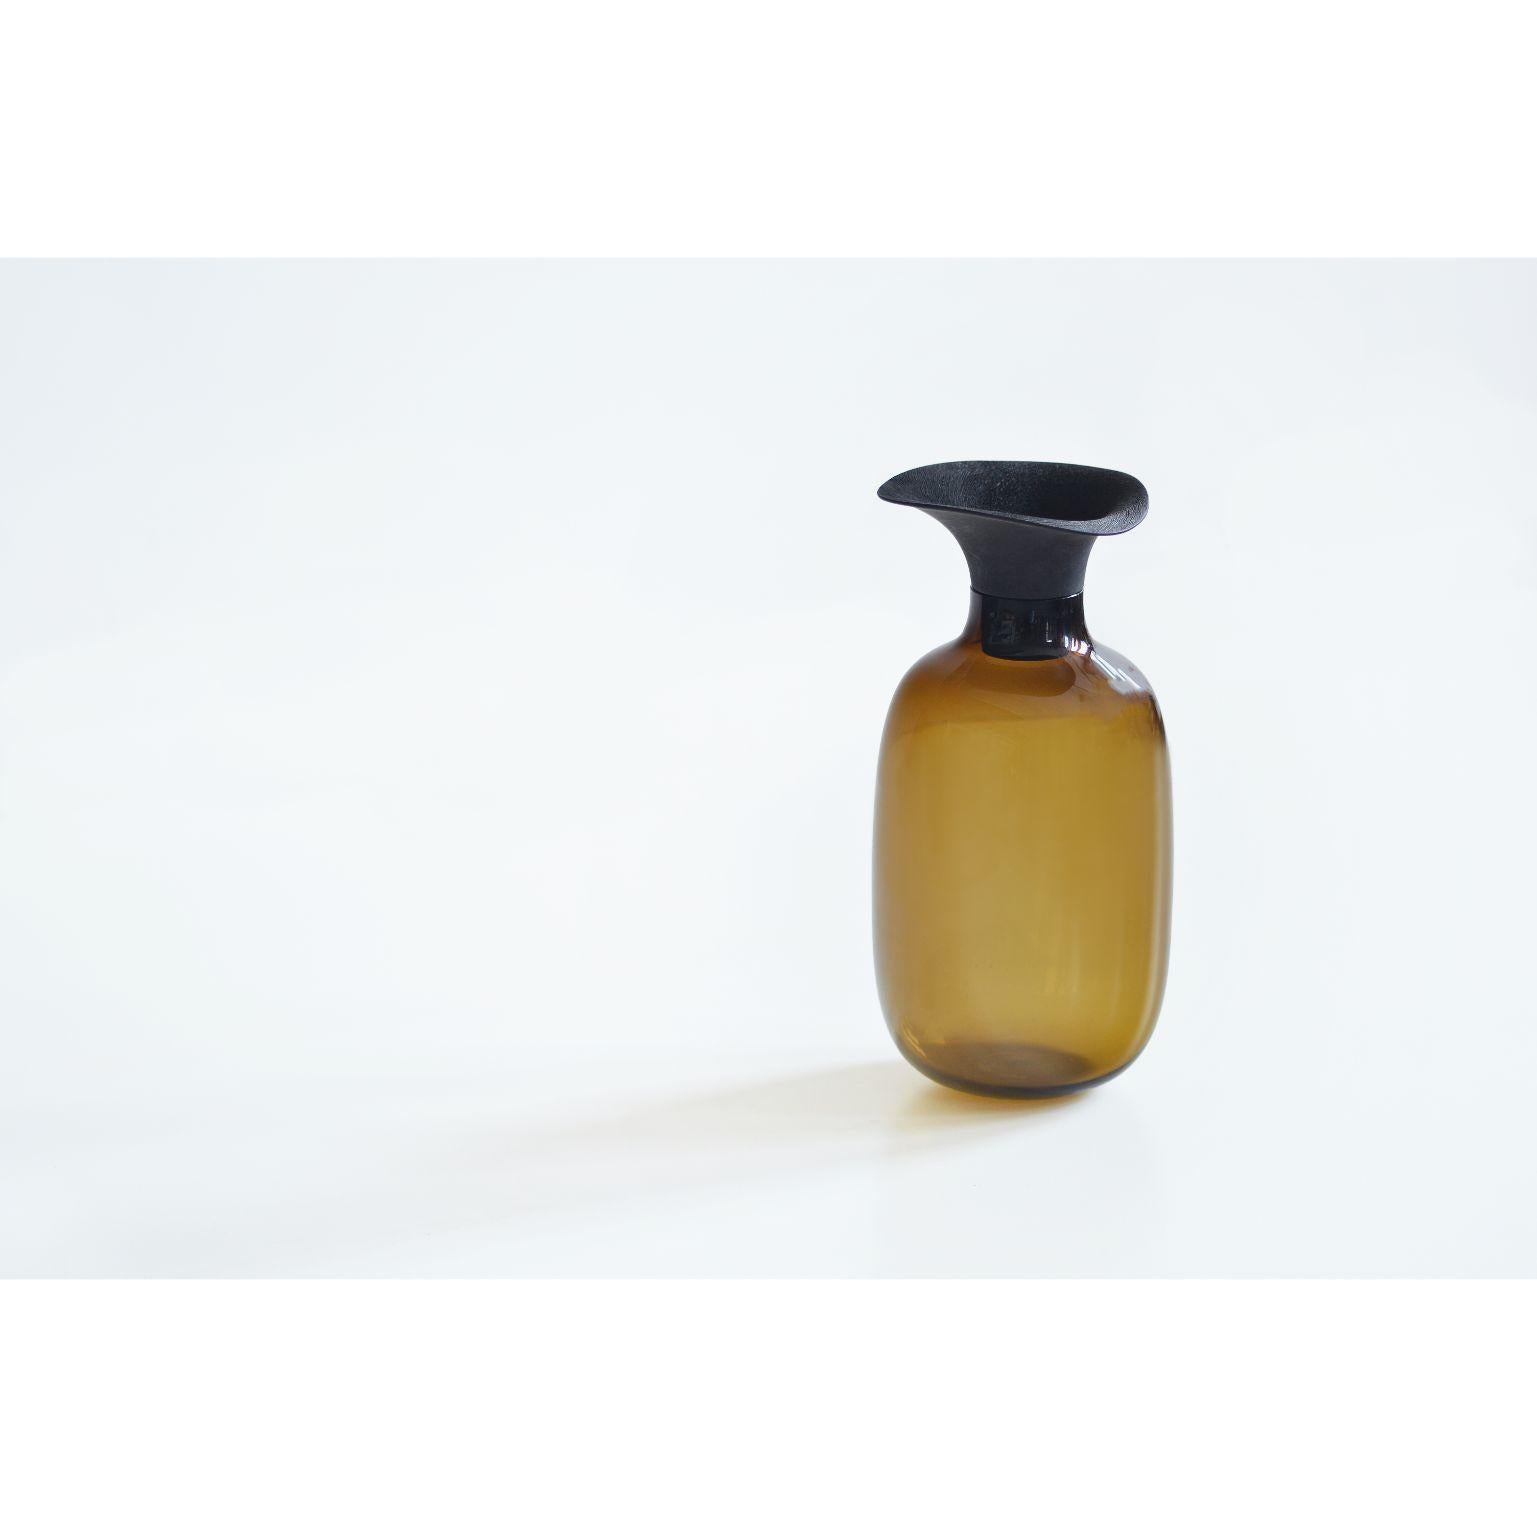 Large Vieno bottle by Antrei Hartikainen
Materials: Glass, linden wood, black stain & natural oil wax
Dimensions: 
Width 20cm
Depth 20cm
Height 28cm
Bottle diameter 20 cm

Limited Edition

  

Vieno combine delicate and shiny glass as